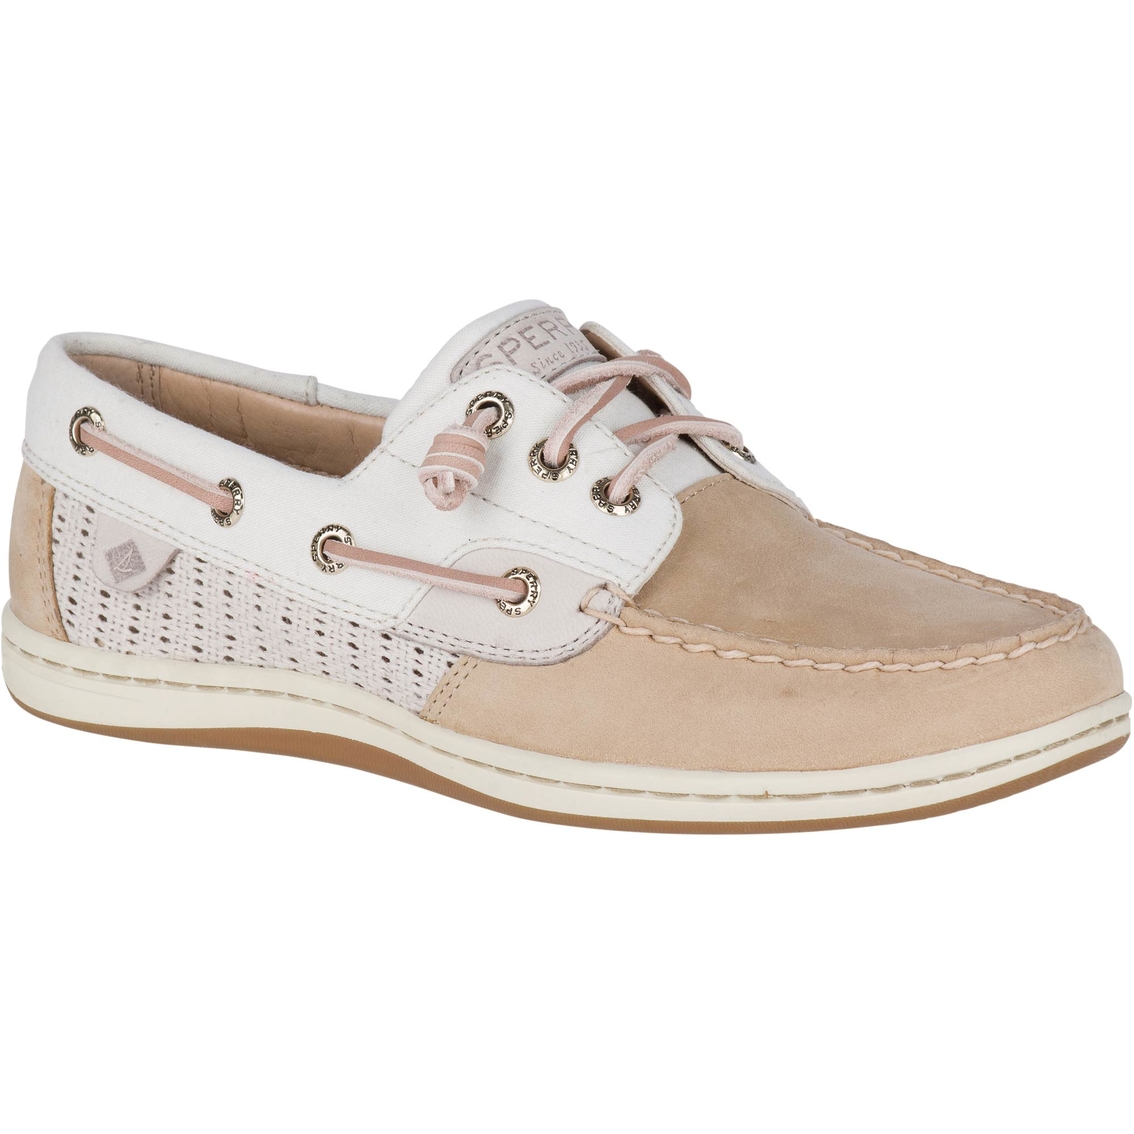 sperry women's songfish boat shoes